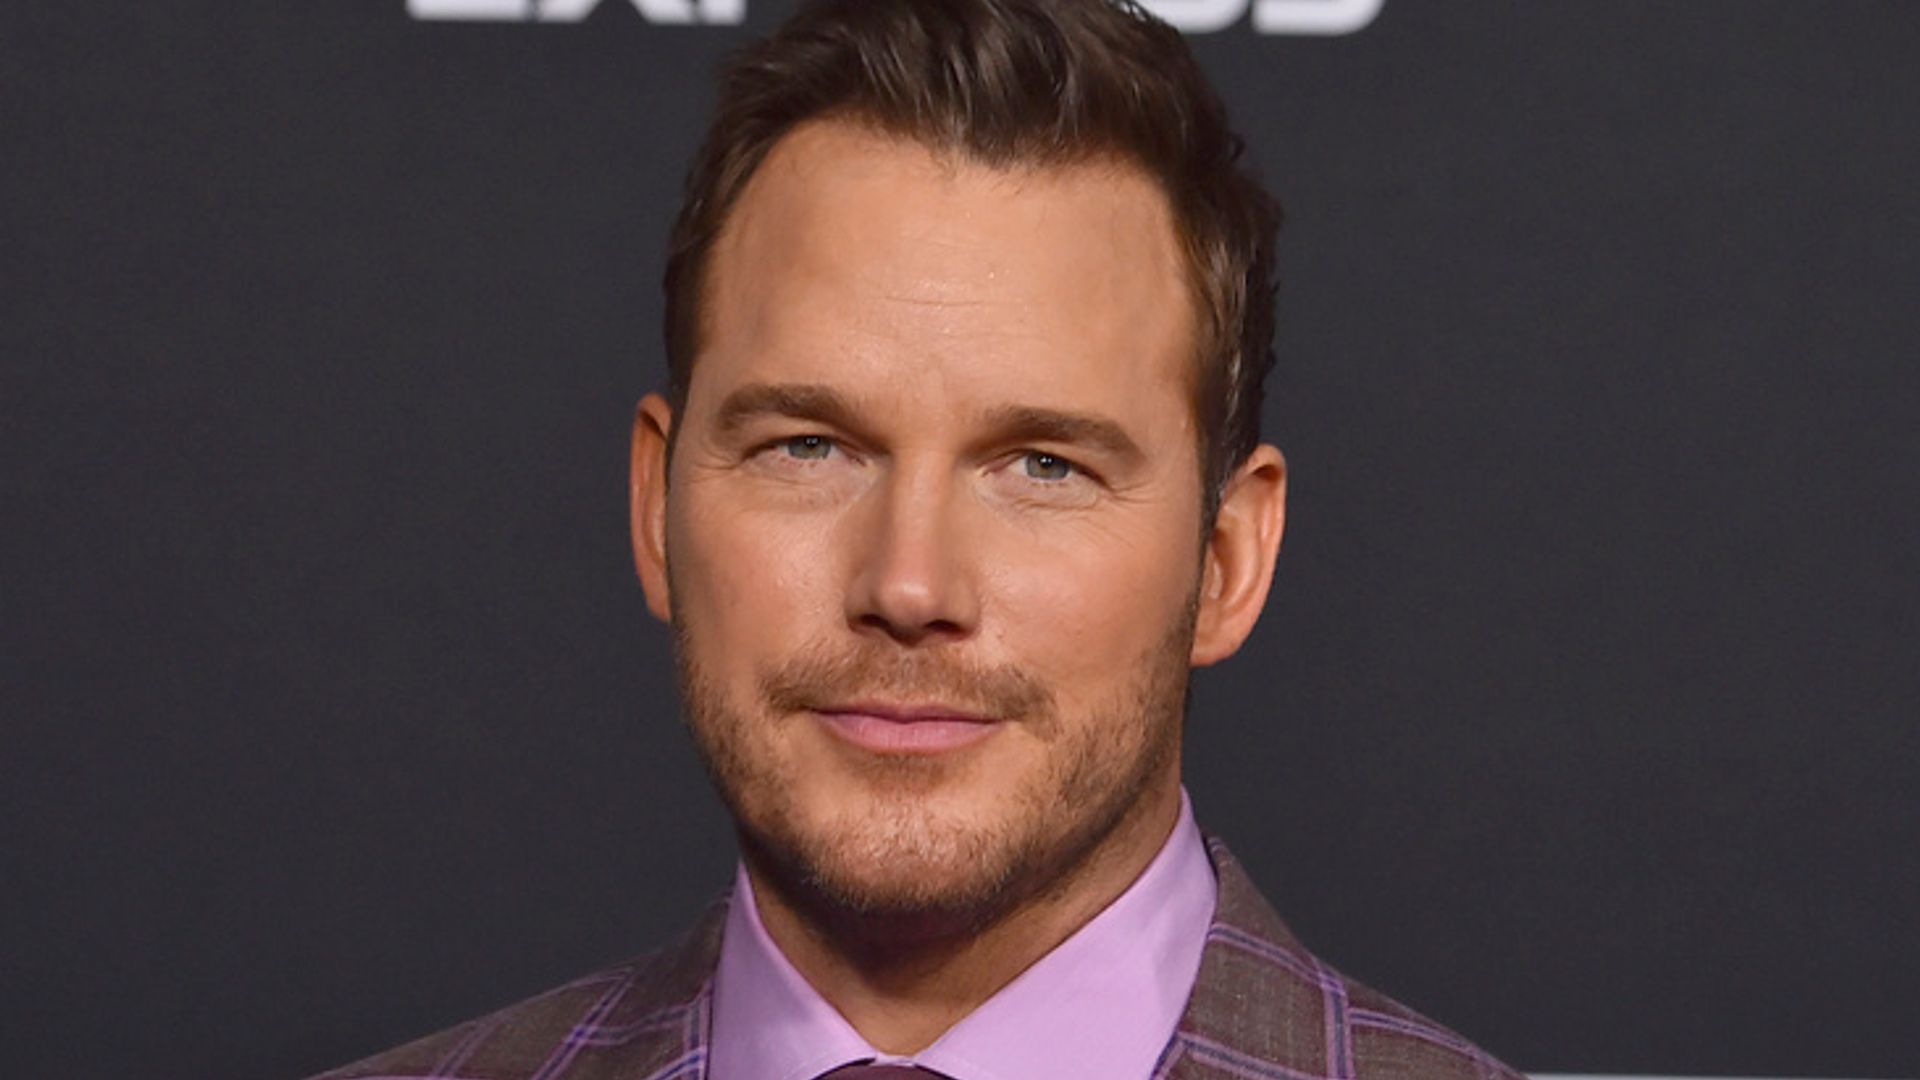 Chris Pratt pays tribute after 'friend and former stunt double' dies unexpectedly